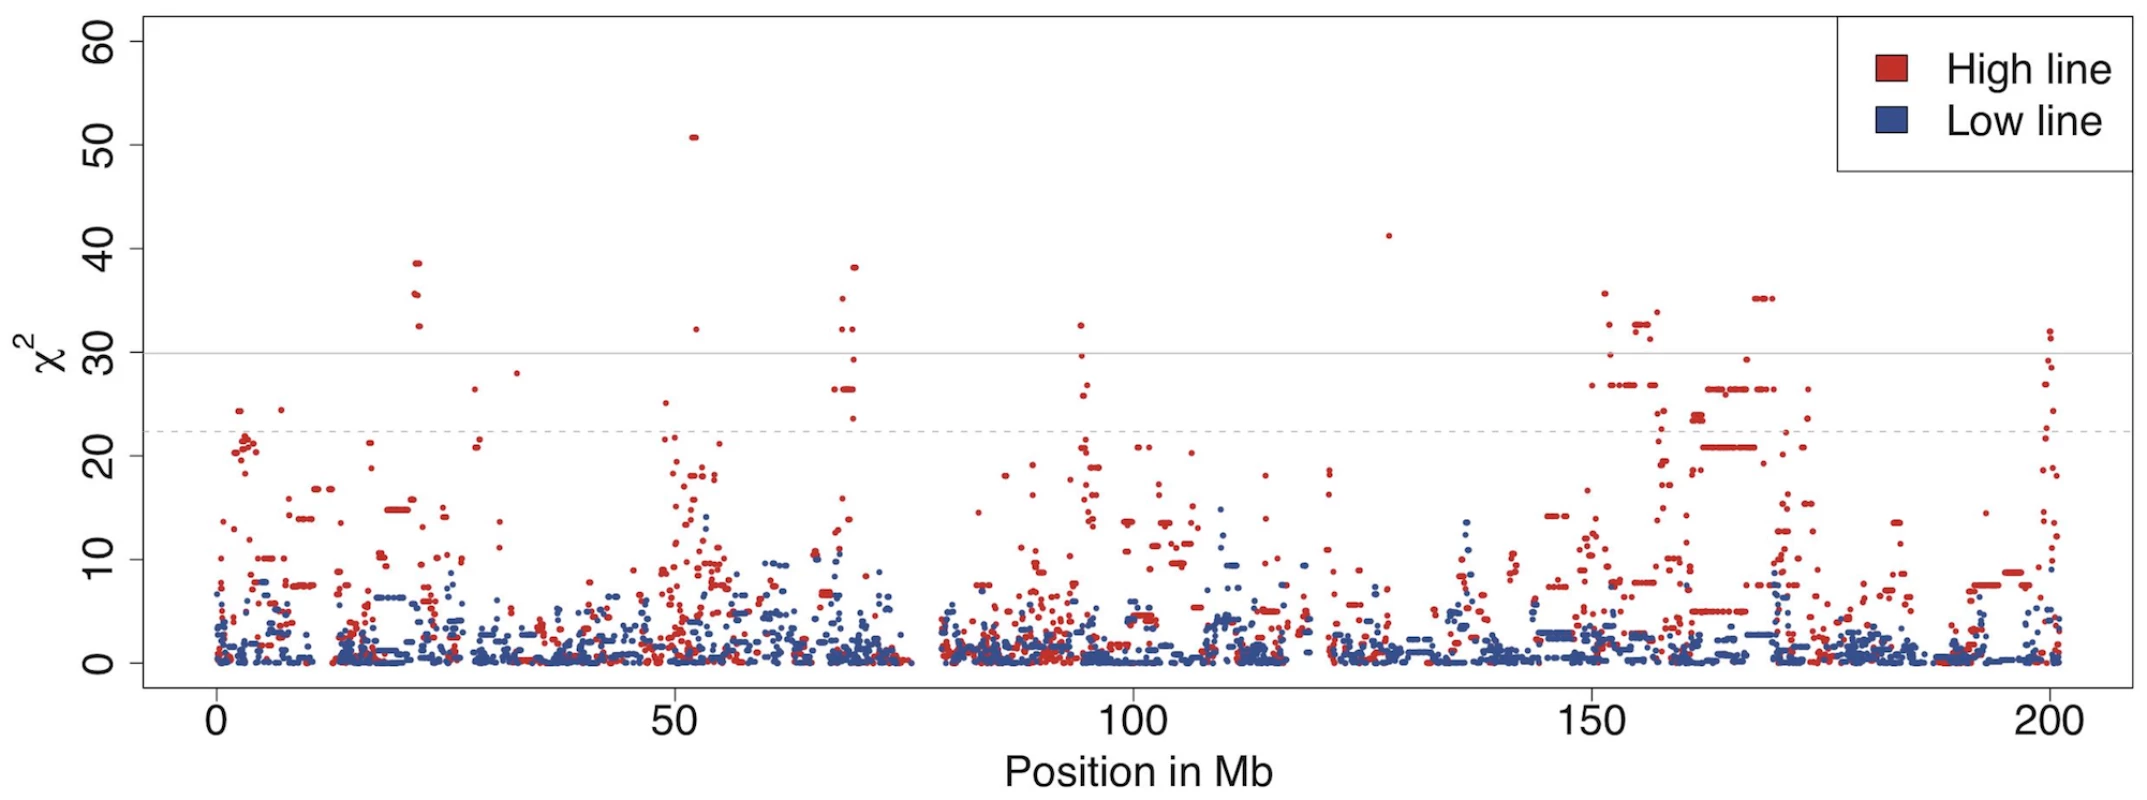 Allele frequency changes between generation 40 and 50 across chromosome 1 as measured by association analysis.